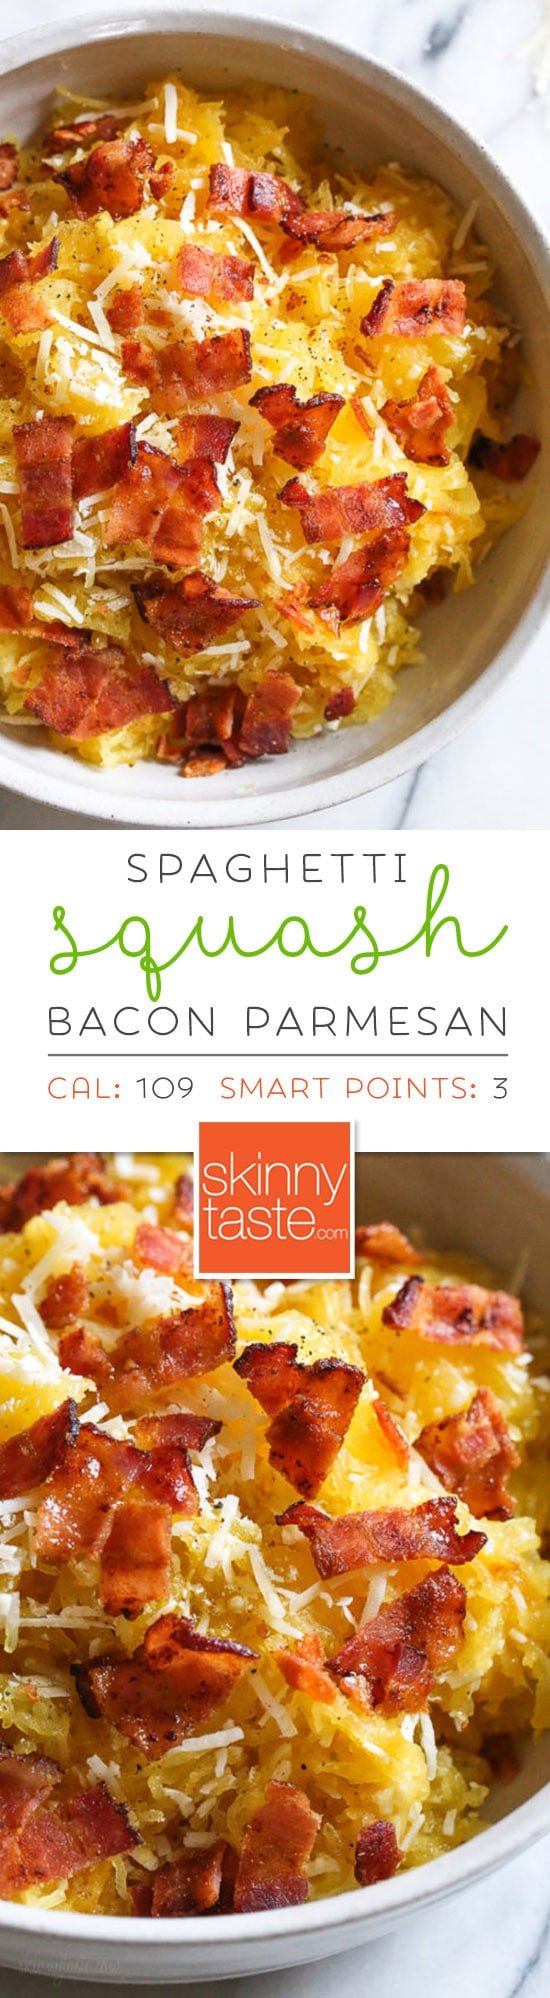 Roasted spaghetti squash with bacon and Parmesan cheese is a great way to top spaghetti squash for an easy, tasty, low-carb side dish. Although there are several methods to cook spaghetti squash, my favorite way to make it is roasted. To roast the squash, I cut it on half lengthwise, remove the seeds and cook it cut down for about one hour. #spaghettisquash #easyspaghettisquashrecipe